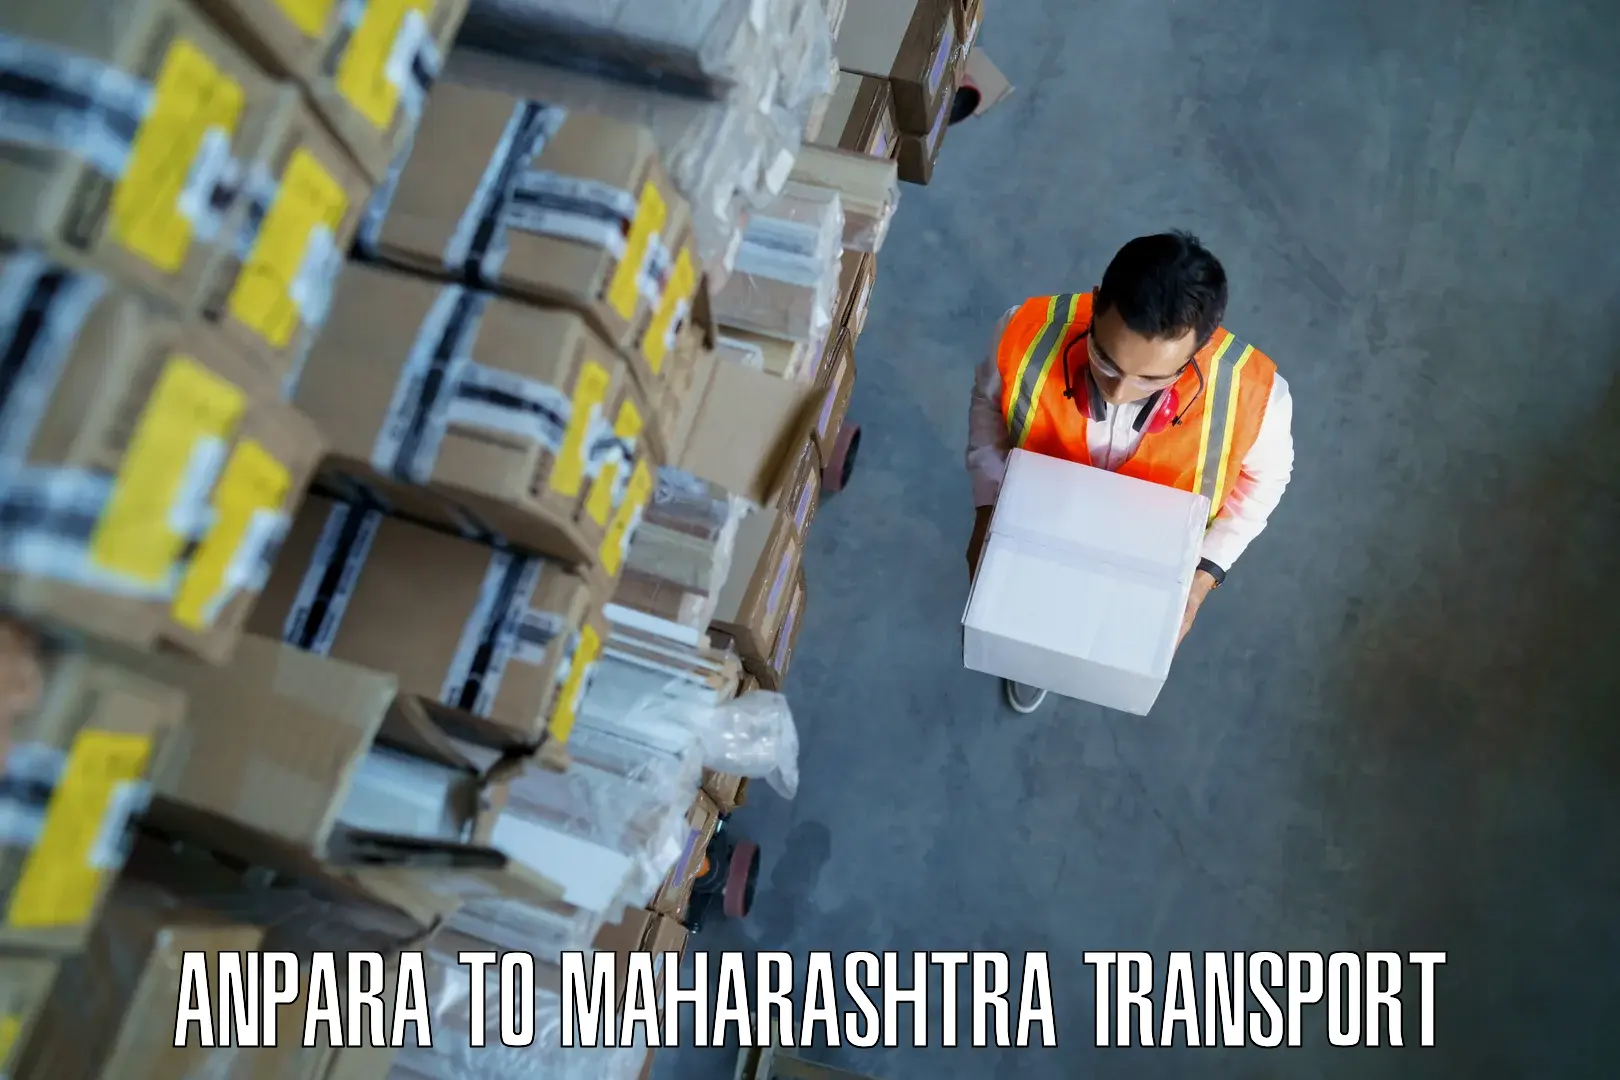 Daily parcel service transport Anpara to Pimpri Chinchwad